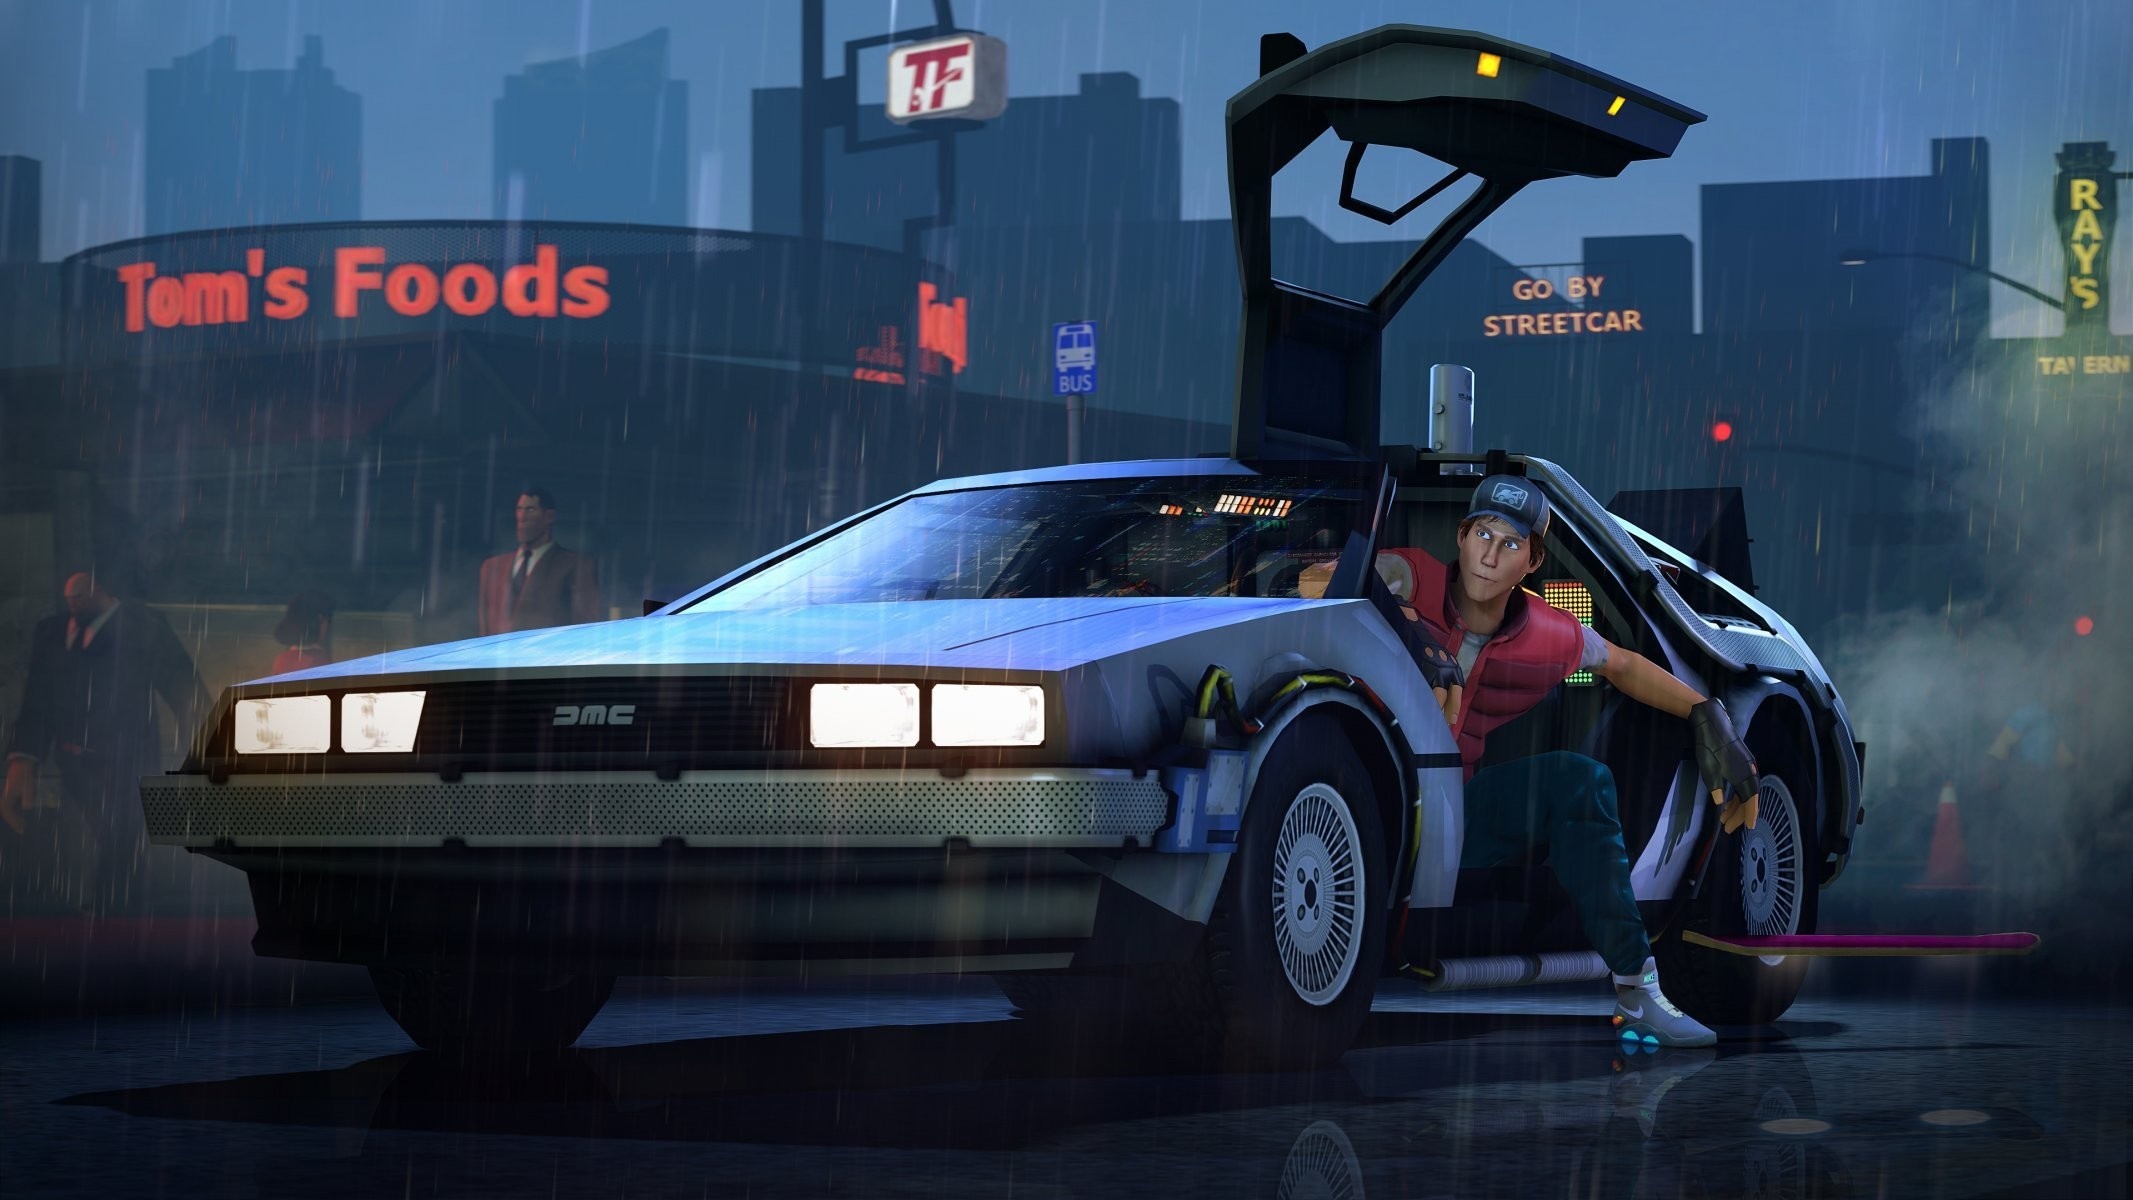 Back to the Future, 1080p Wallpaper, Time Travel, Classic Movie, 2140x1200 HD Desktop